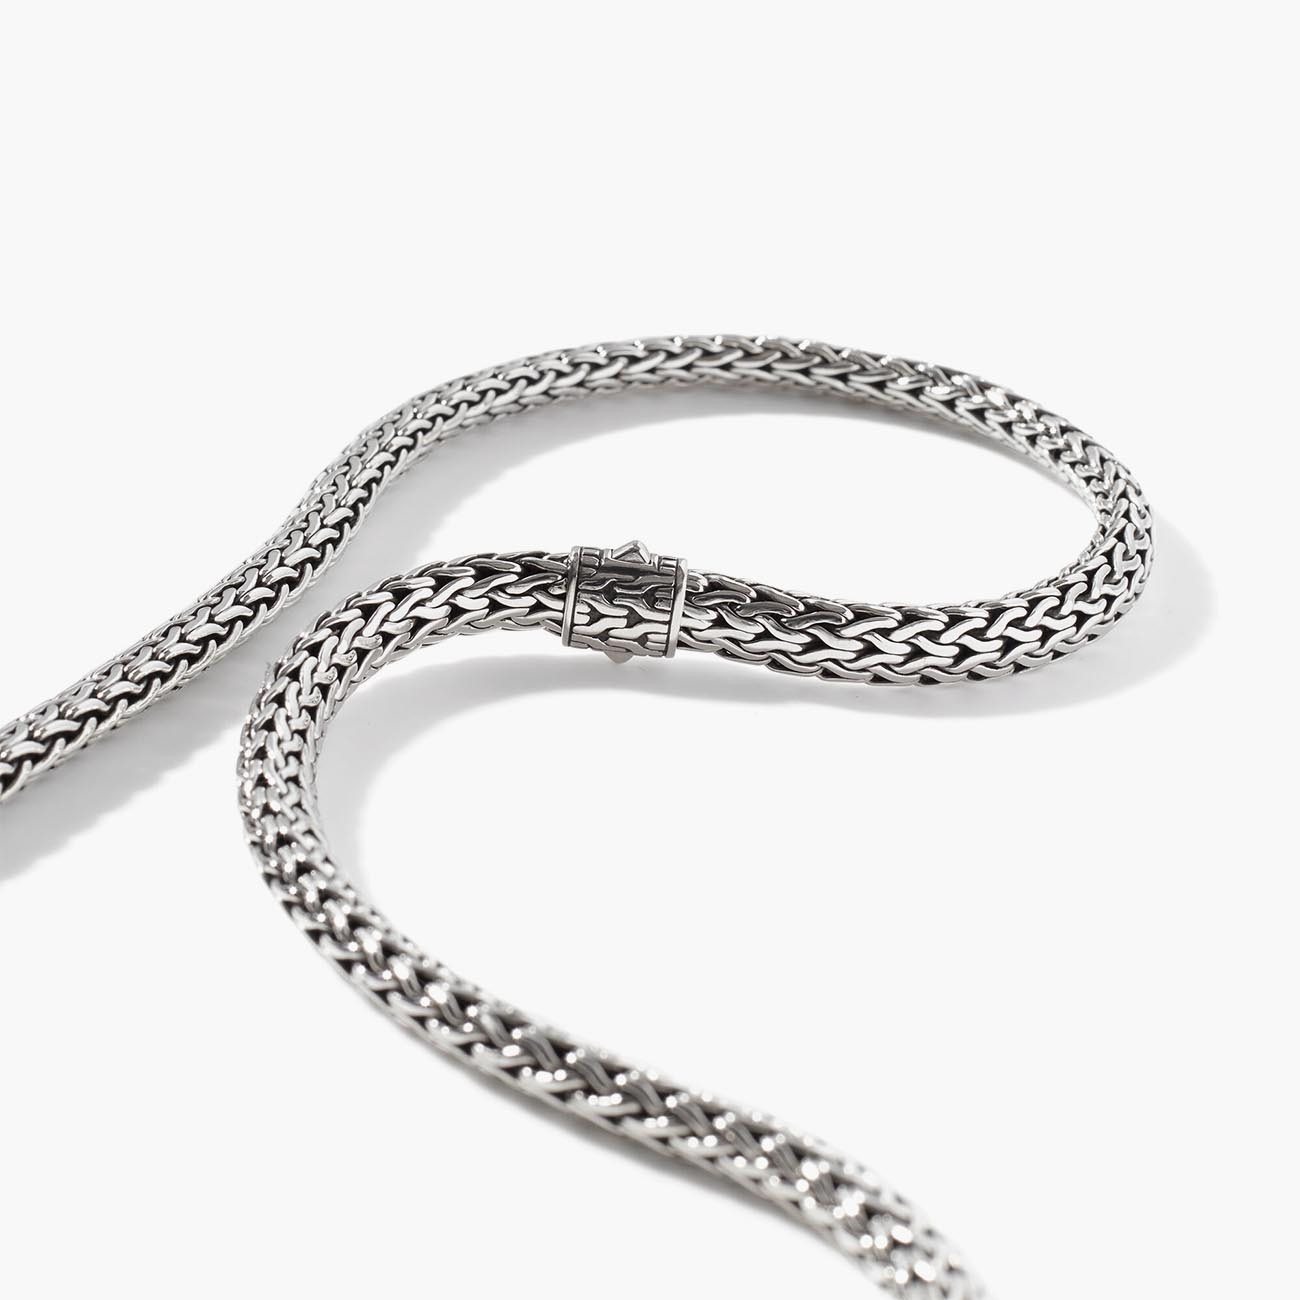 John Hardy 7.45mm Classic Chain Silver Necklace with Chain Clasp